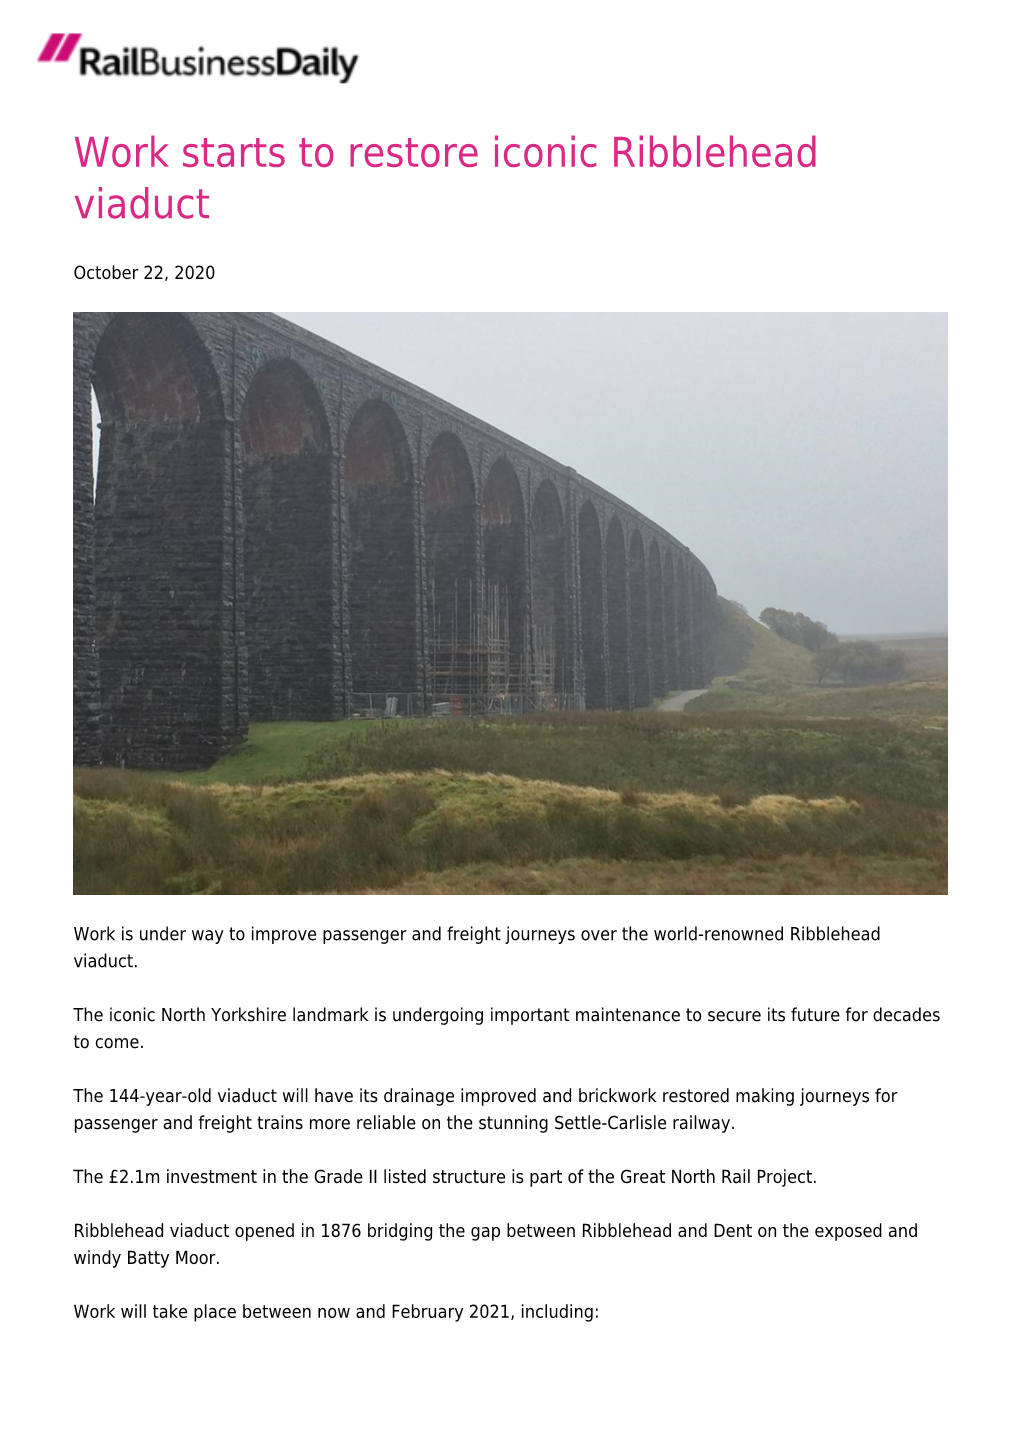 Work Starts to Restore Iconic Ribblehead Viaduct